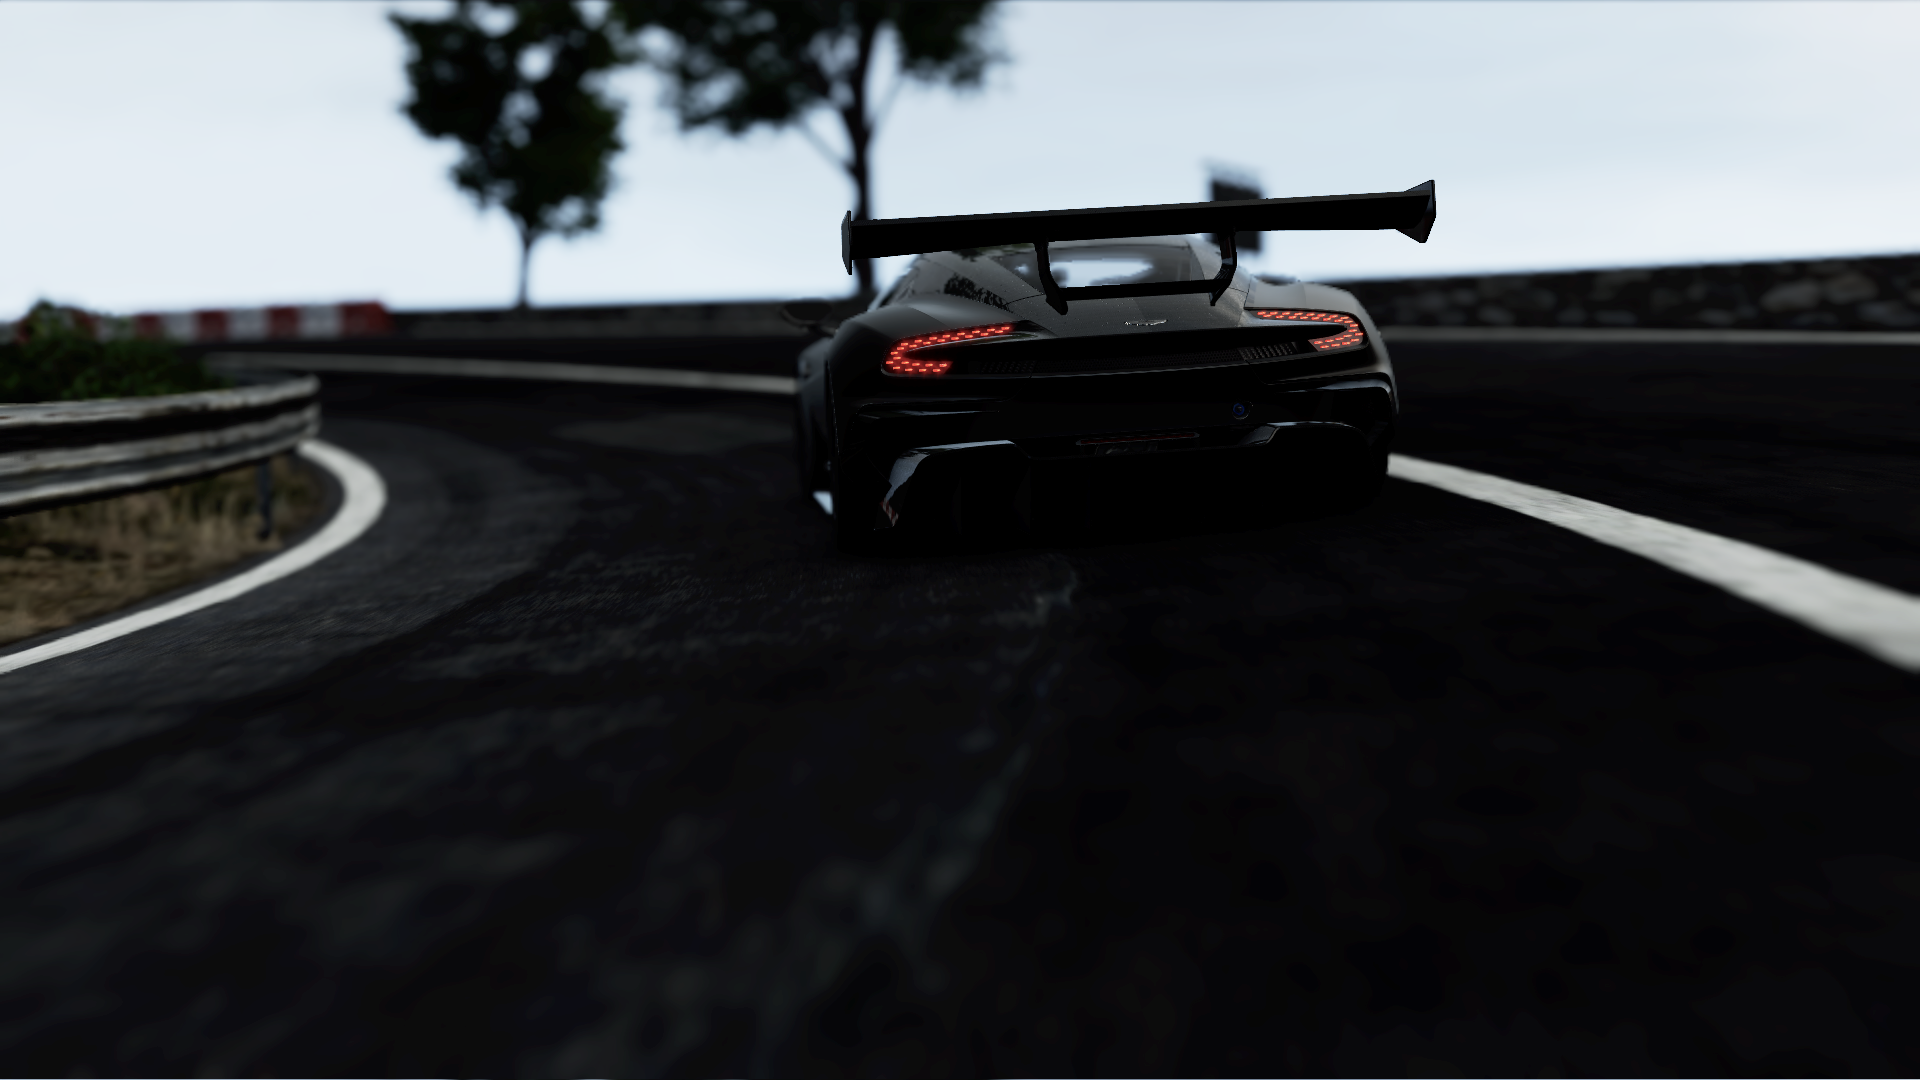 Aston Martin Vulcan Project Cars Project Cars 2 Video Game 1920x1080